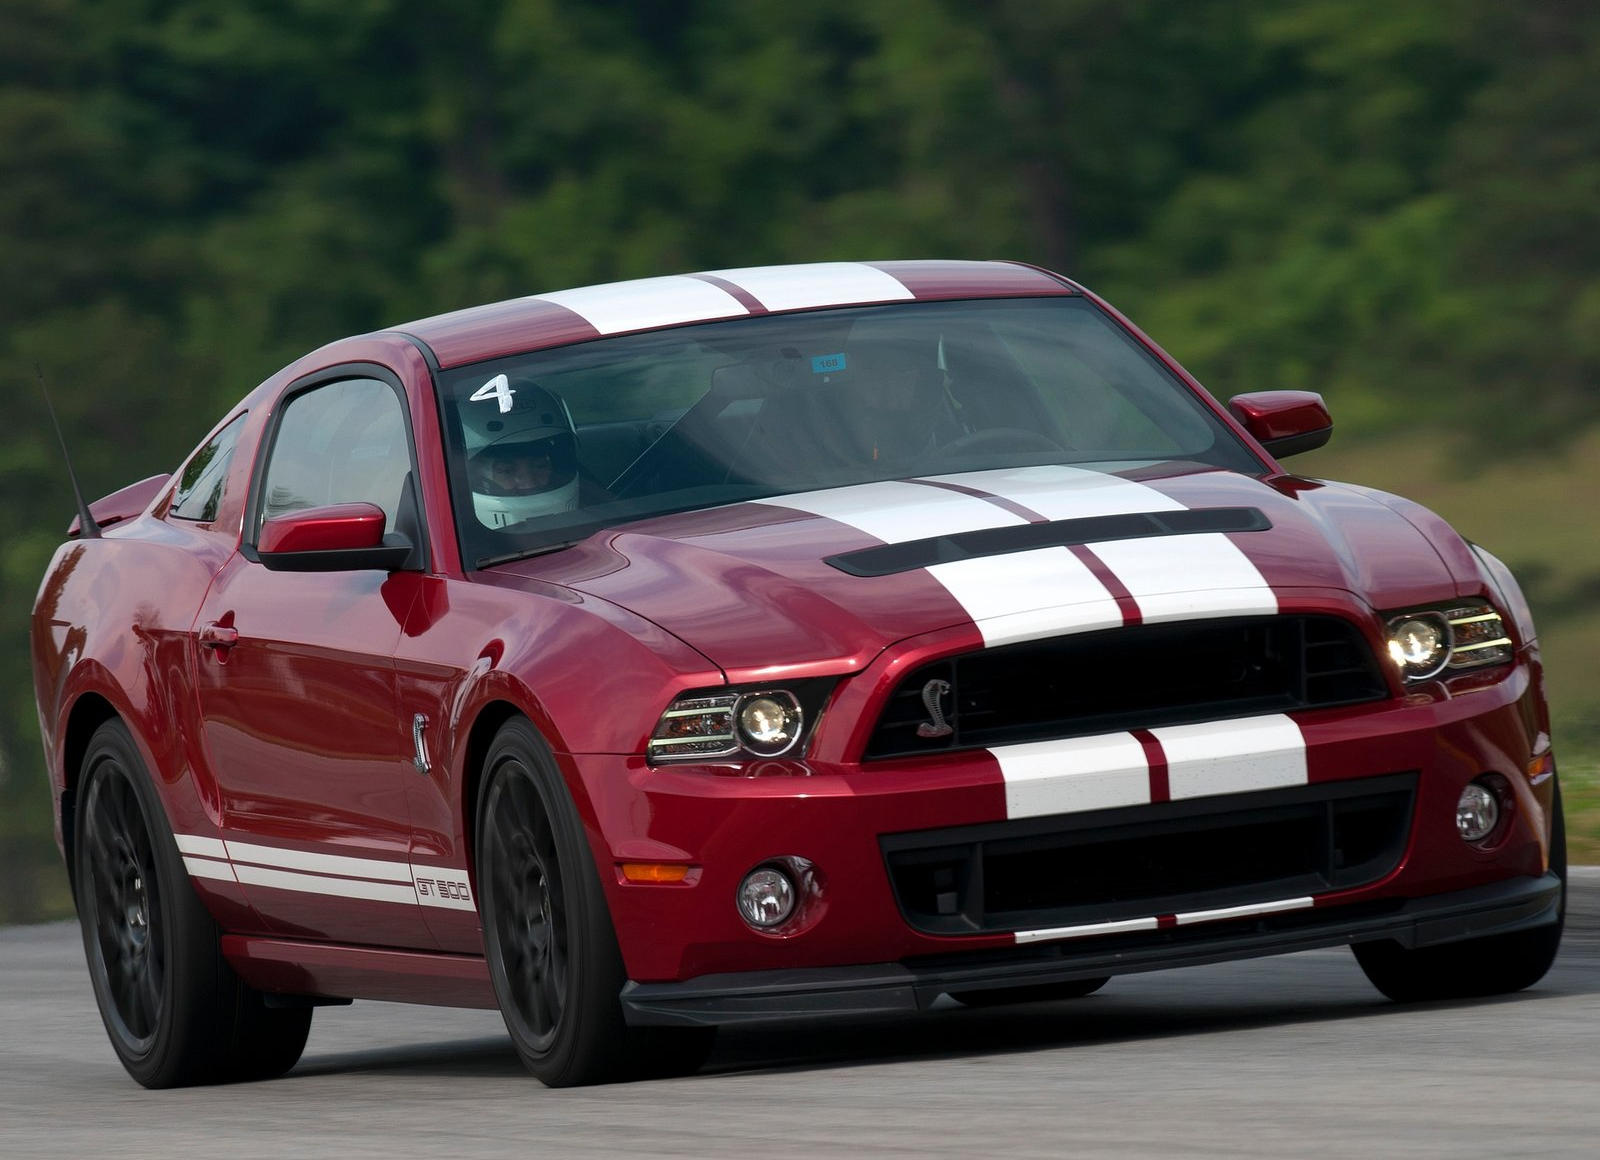 2011 Ford Mustang Shelby GT500 Exterior Photos | CarBuzz